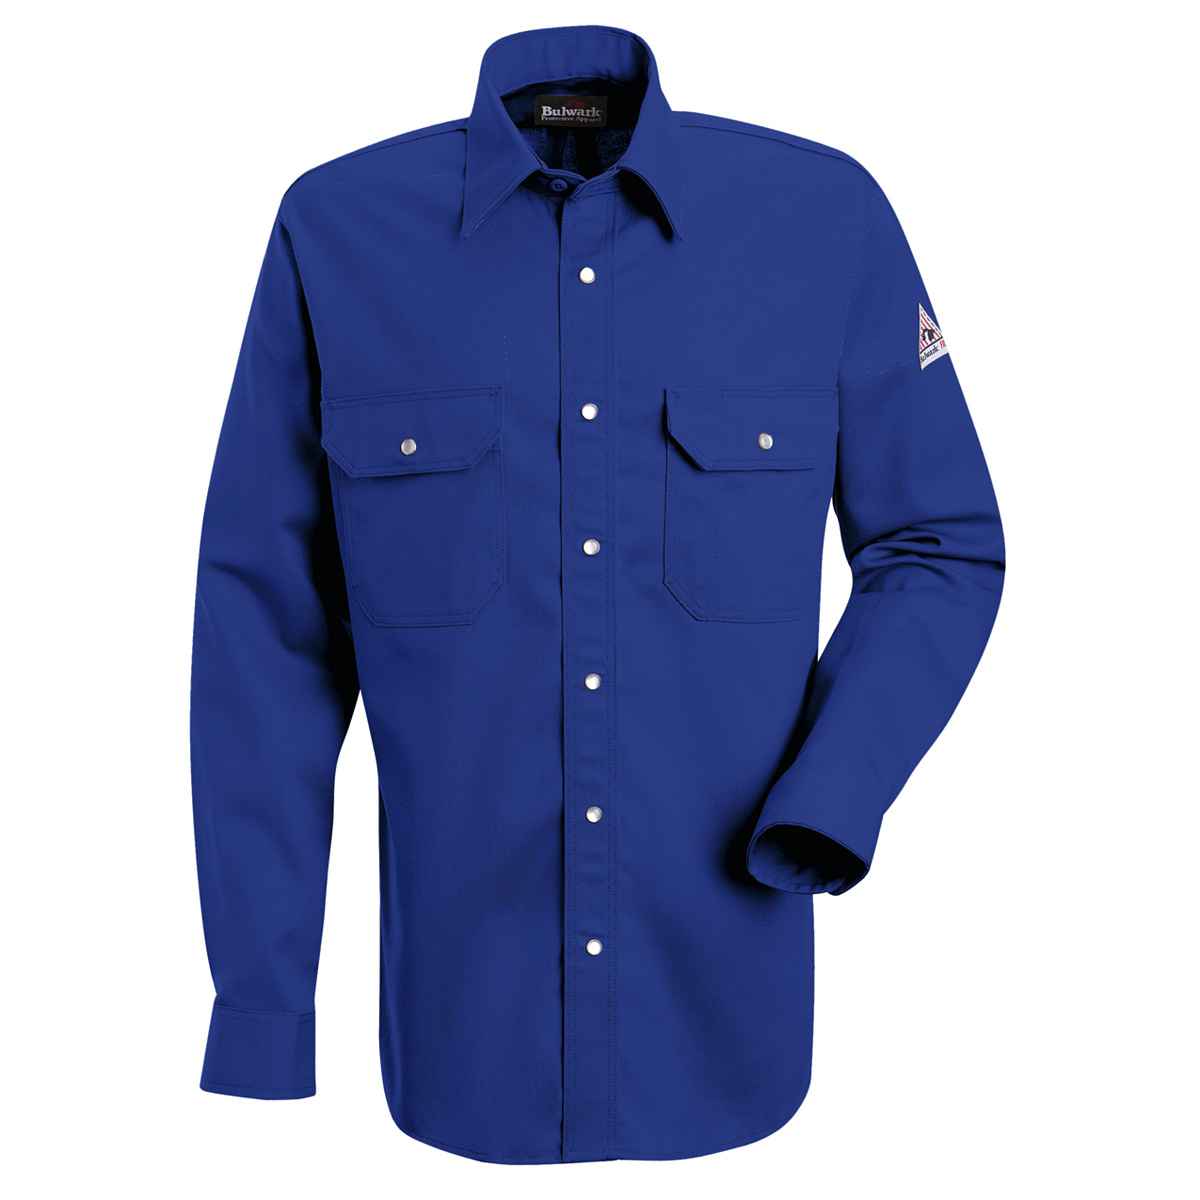 Bulwark® Large Tall Royal Blue EXCEL FR® Cotton Flame Resistant Uniform Shirt With Snap Front Closure